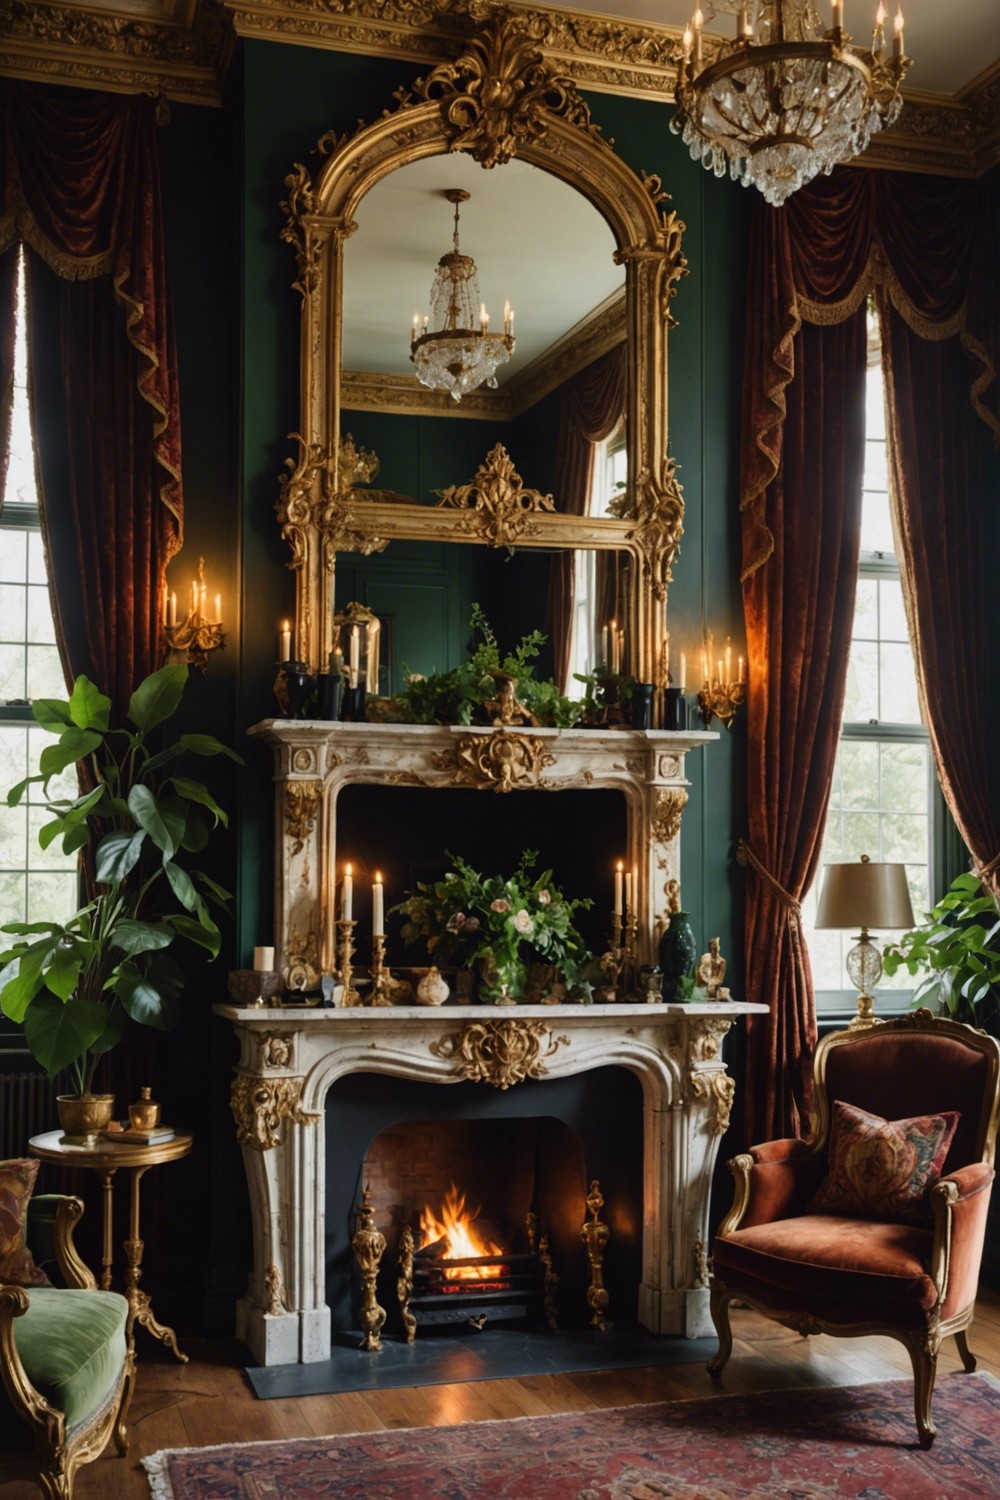 Vintage Glamour with Ornate Mirrors: